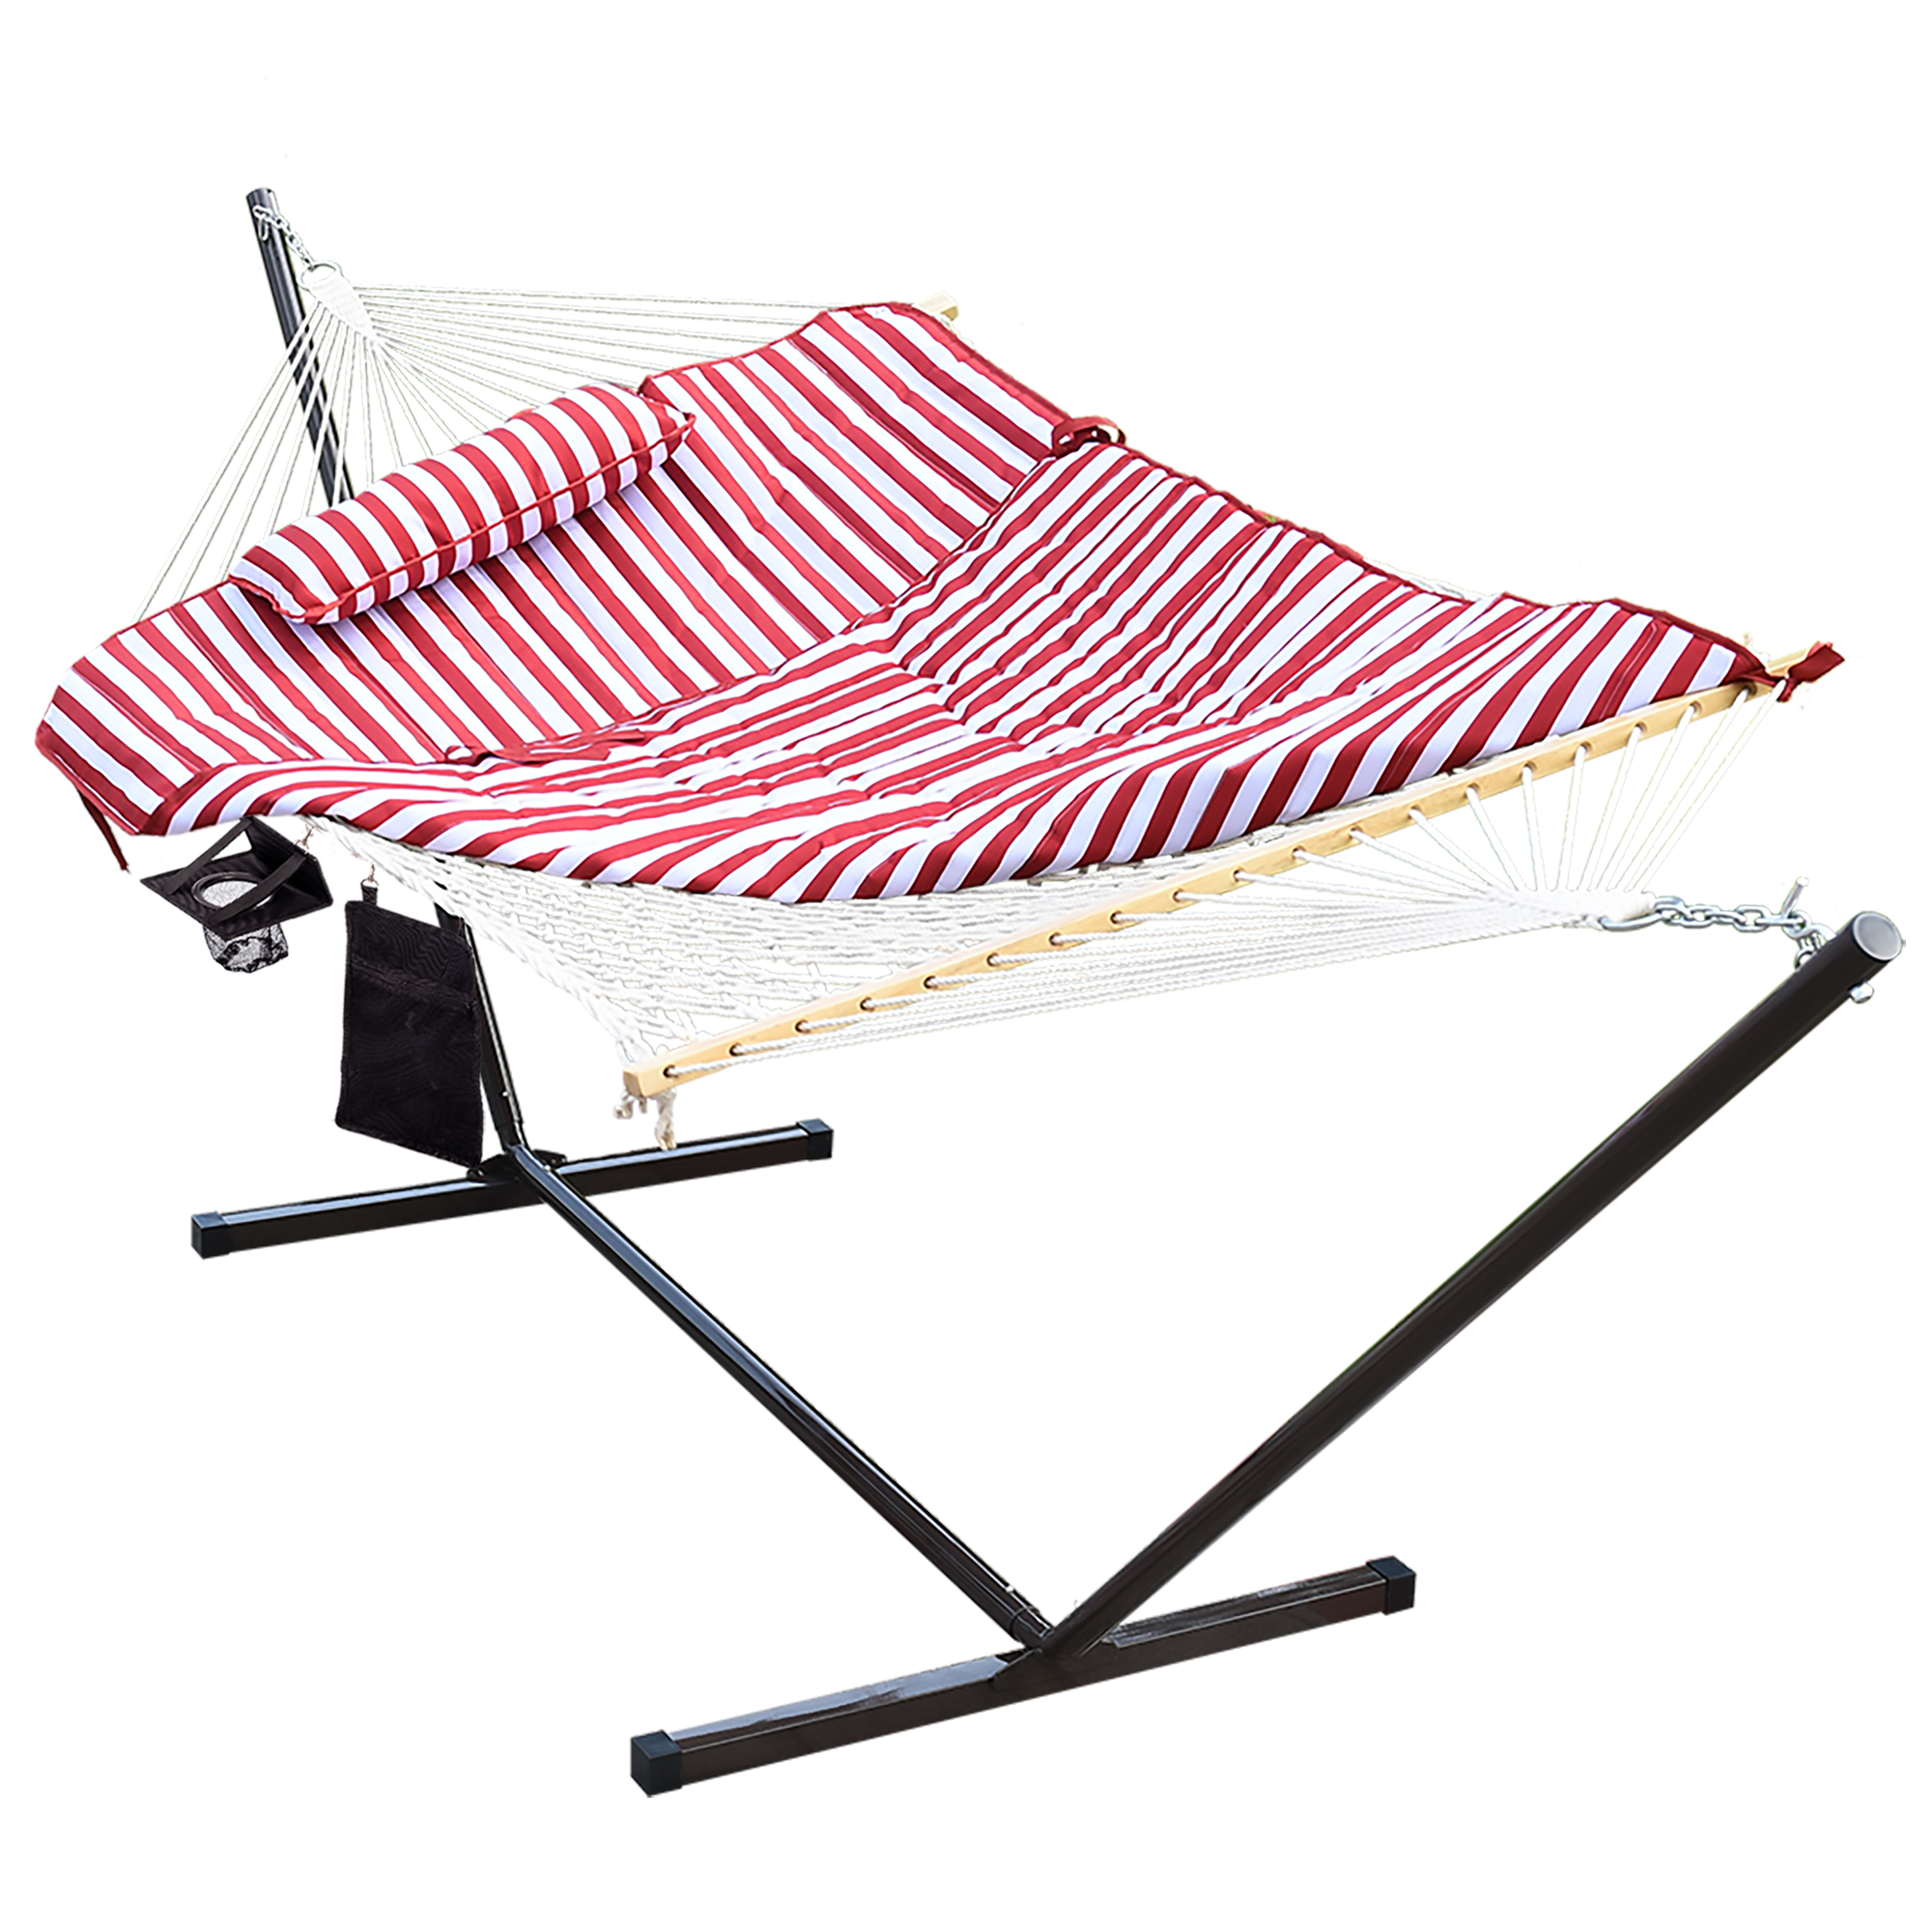 Sundale Outdoor Stripe Cotton Rope Hammock with 12 Feet Steel Stand, Quilted Polyester Pad and Pillow - image 1 of 10